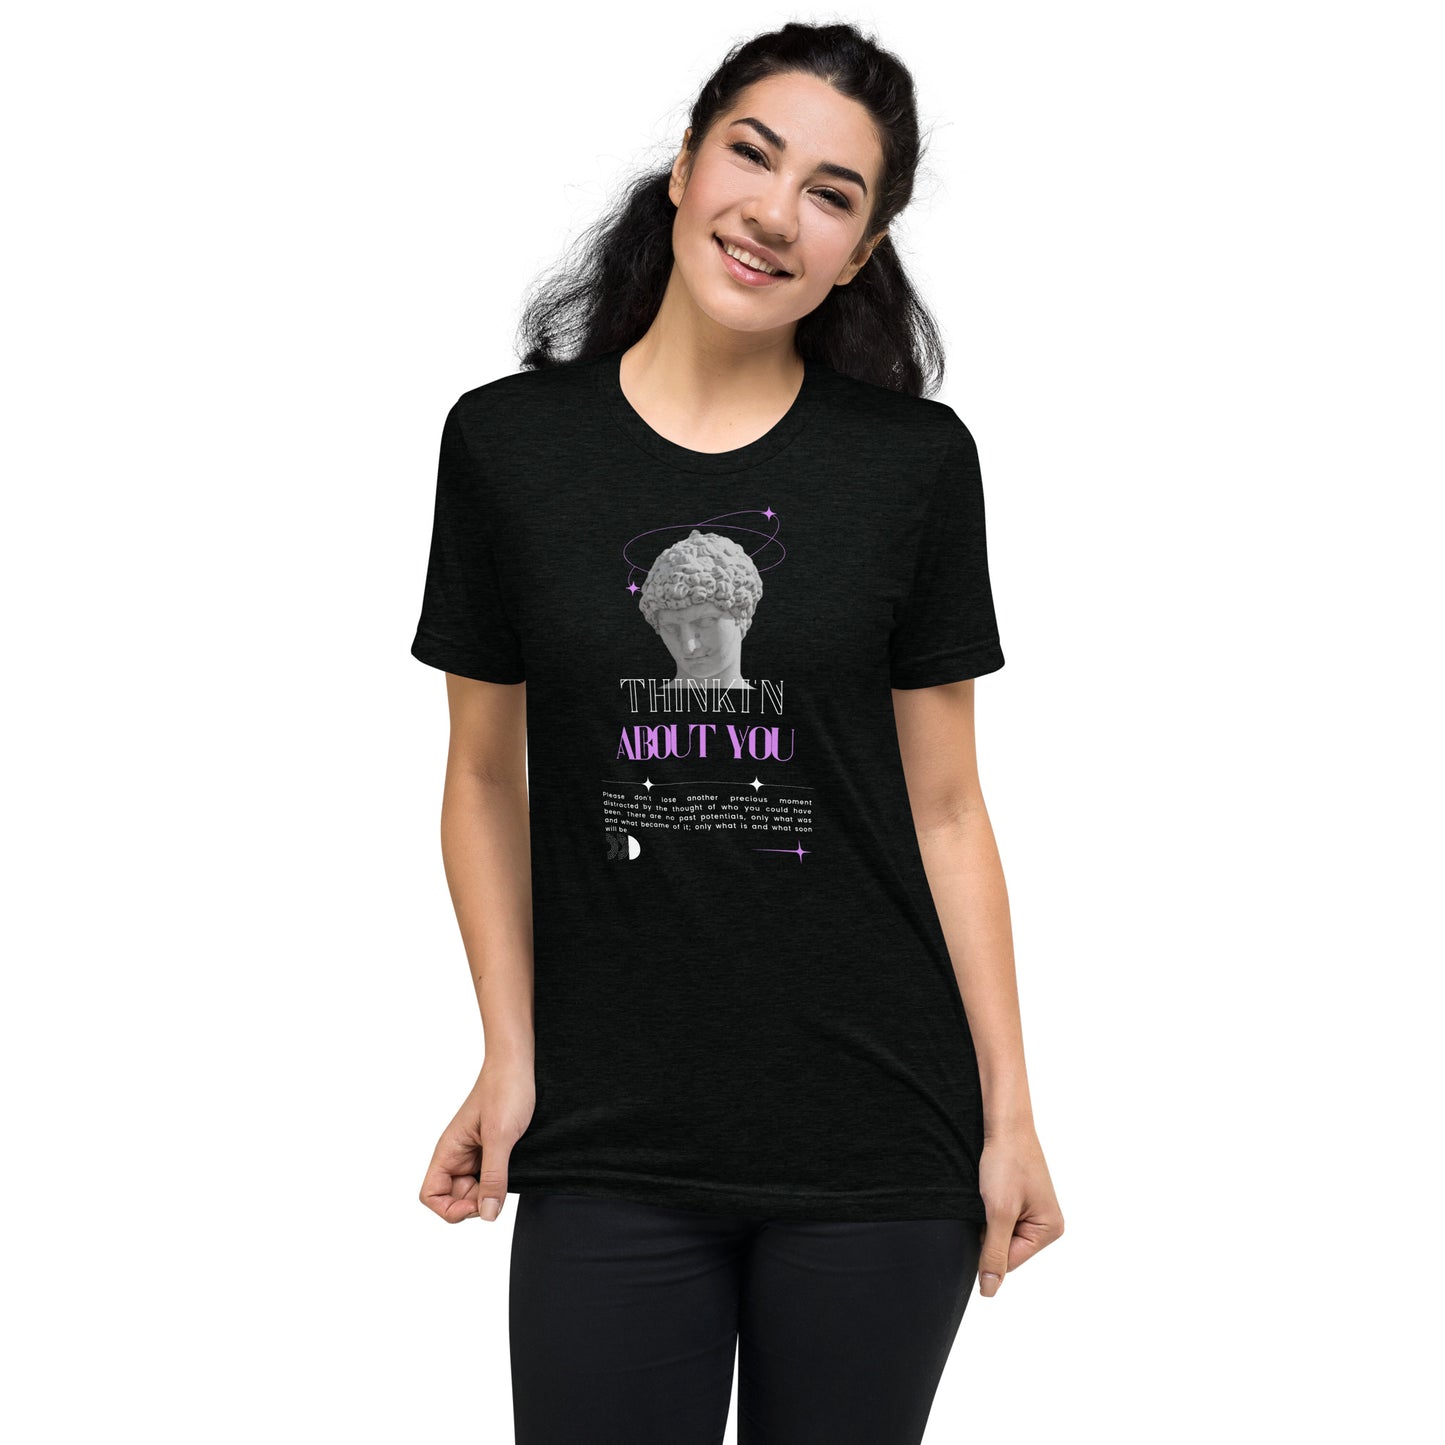 Mindfully Thinki'n About You T-shirt